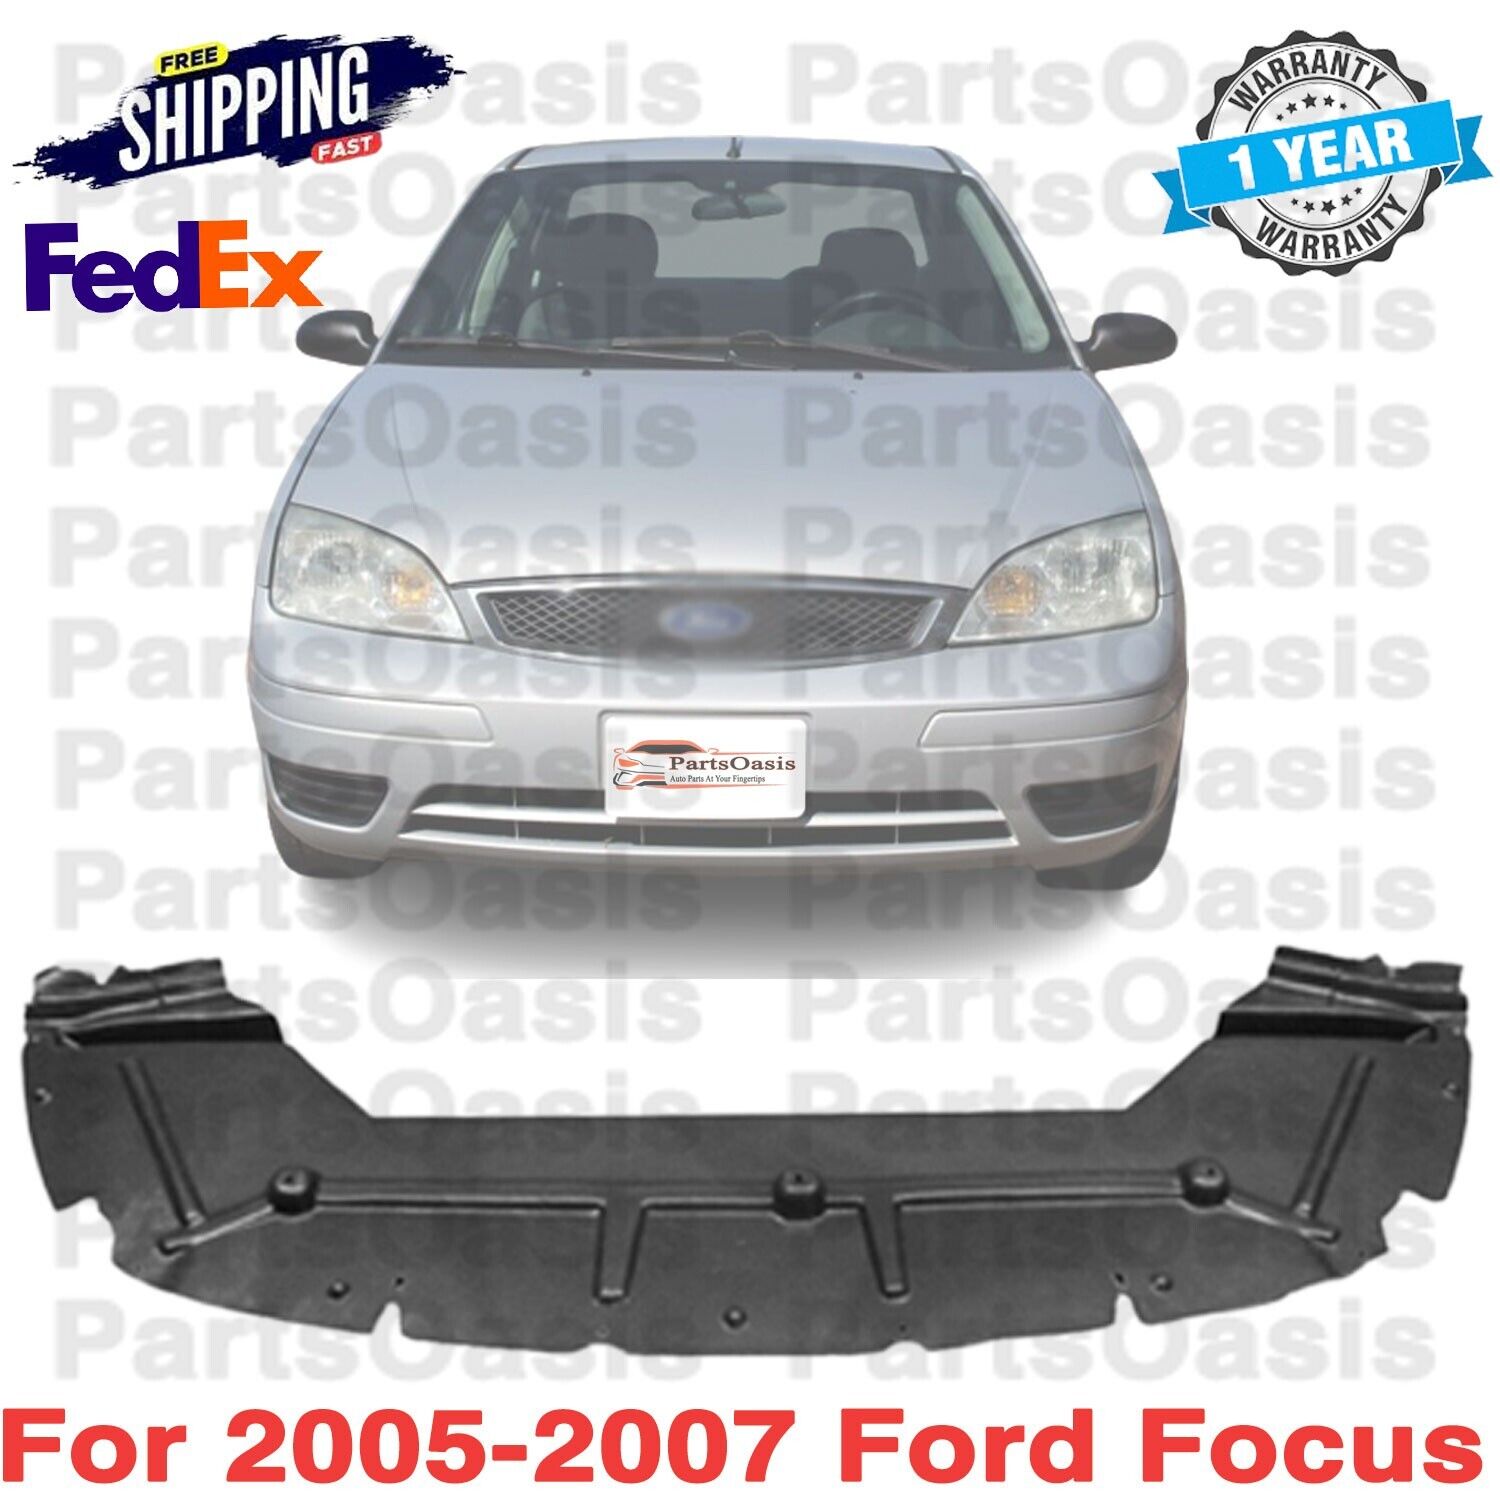 Brand New Standard Replacement Undercar Shield For 2005-2007 Ford Focus